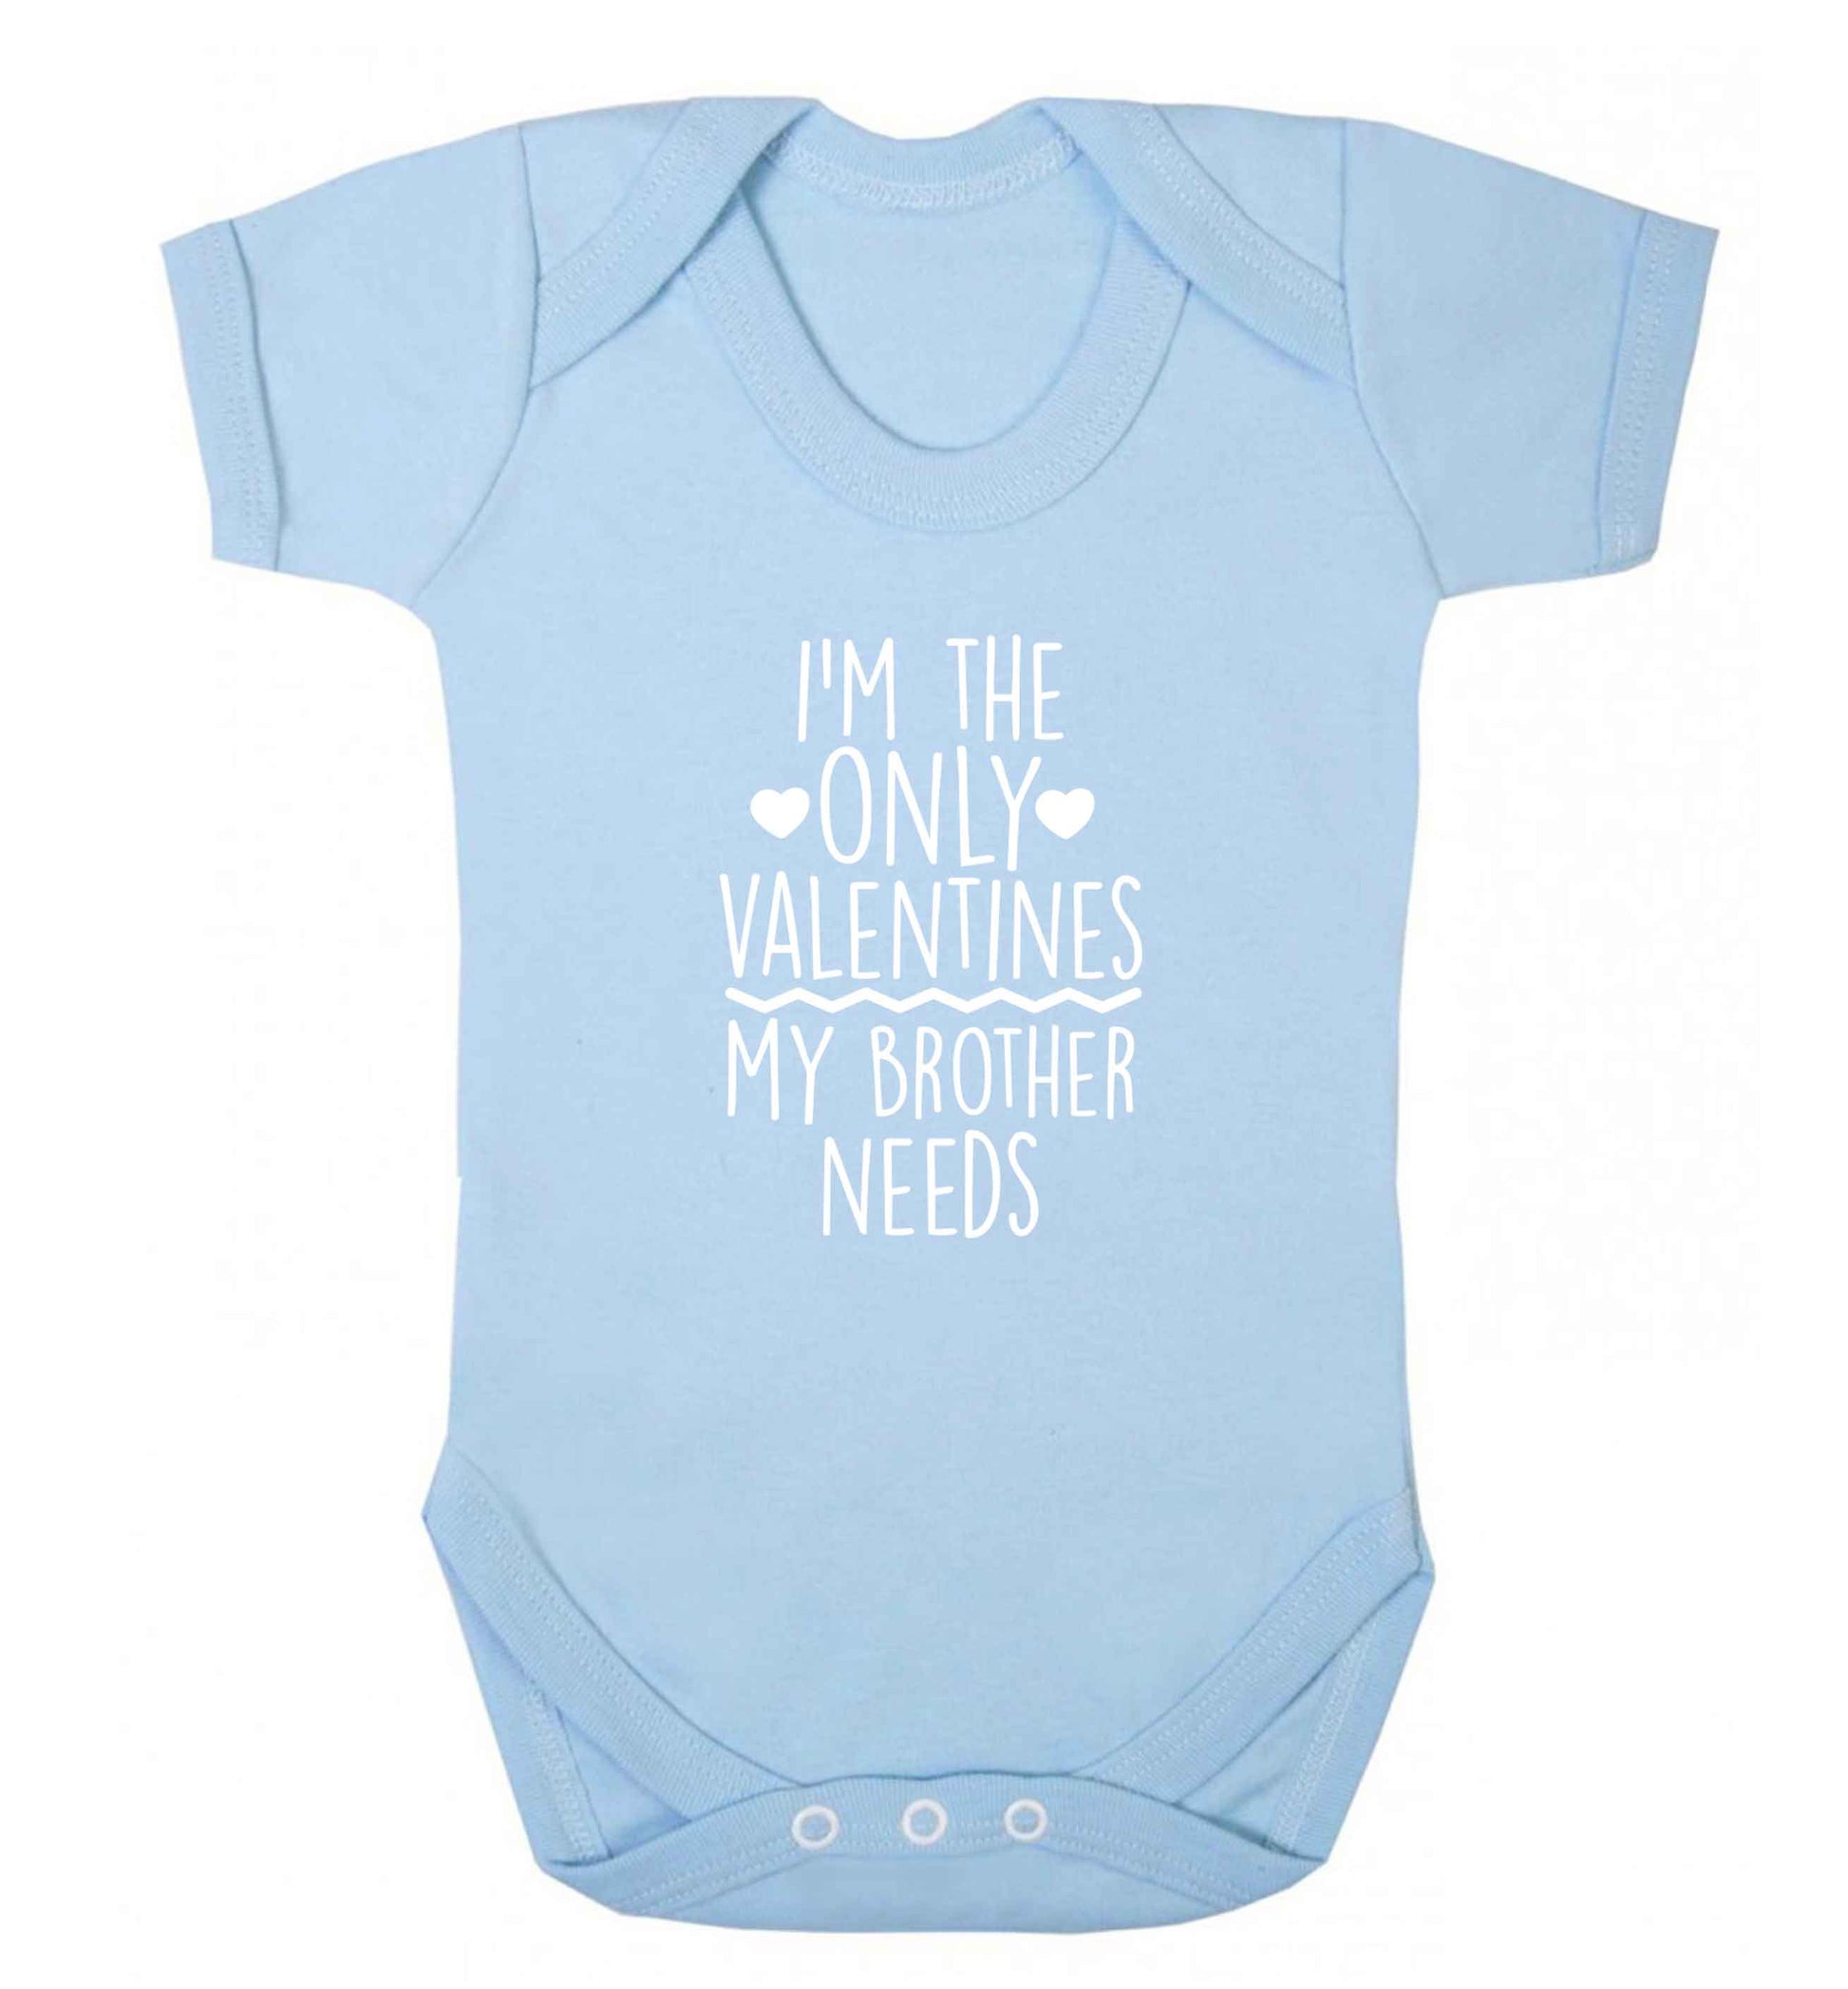 I'm the only valentines my brother needs baby vest pale blue 18-24 months